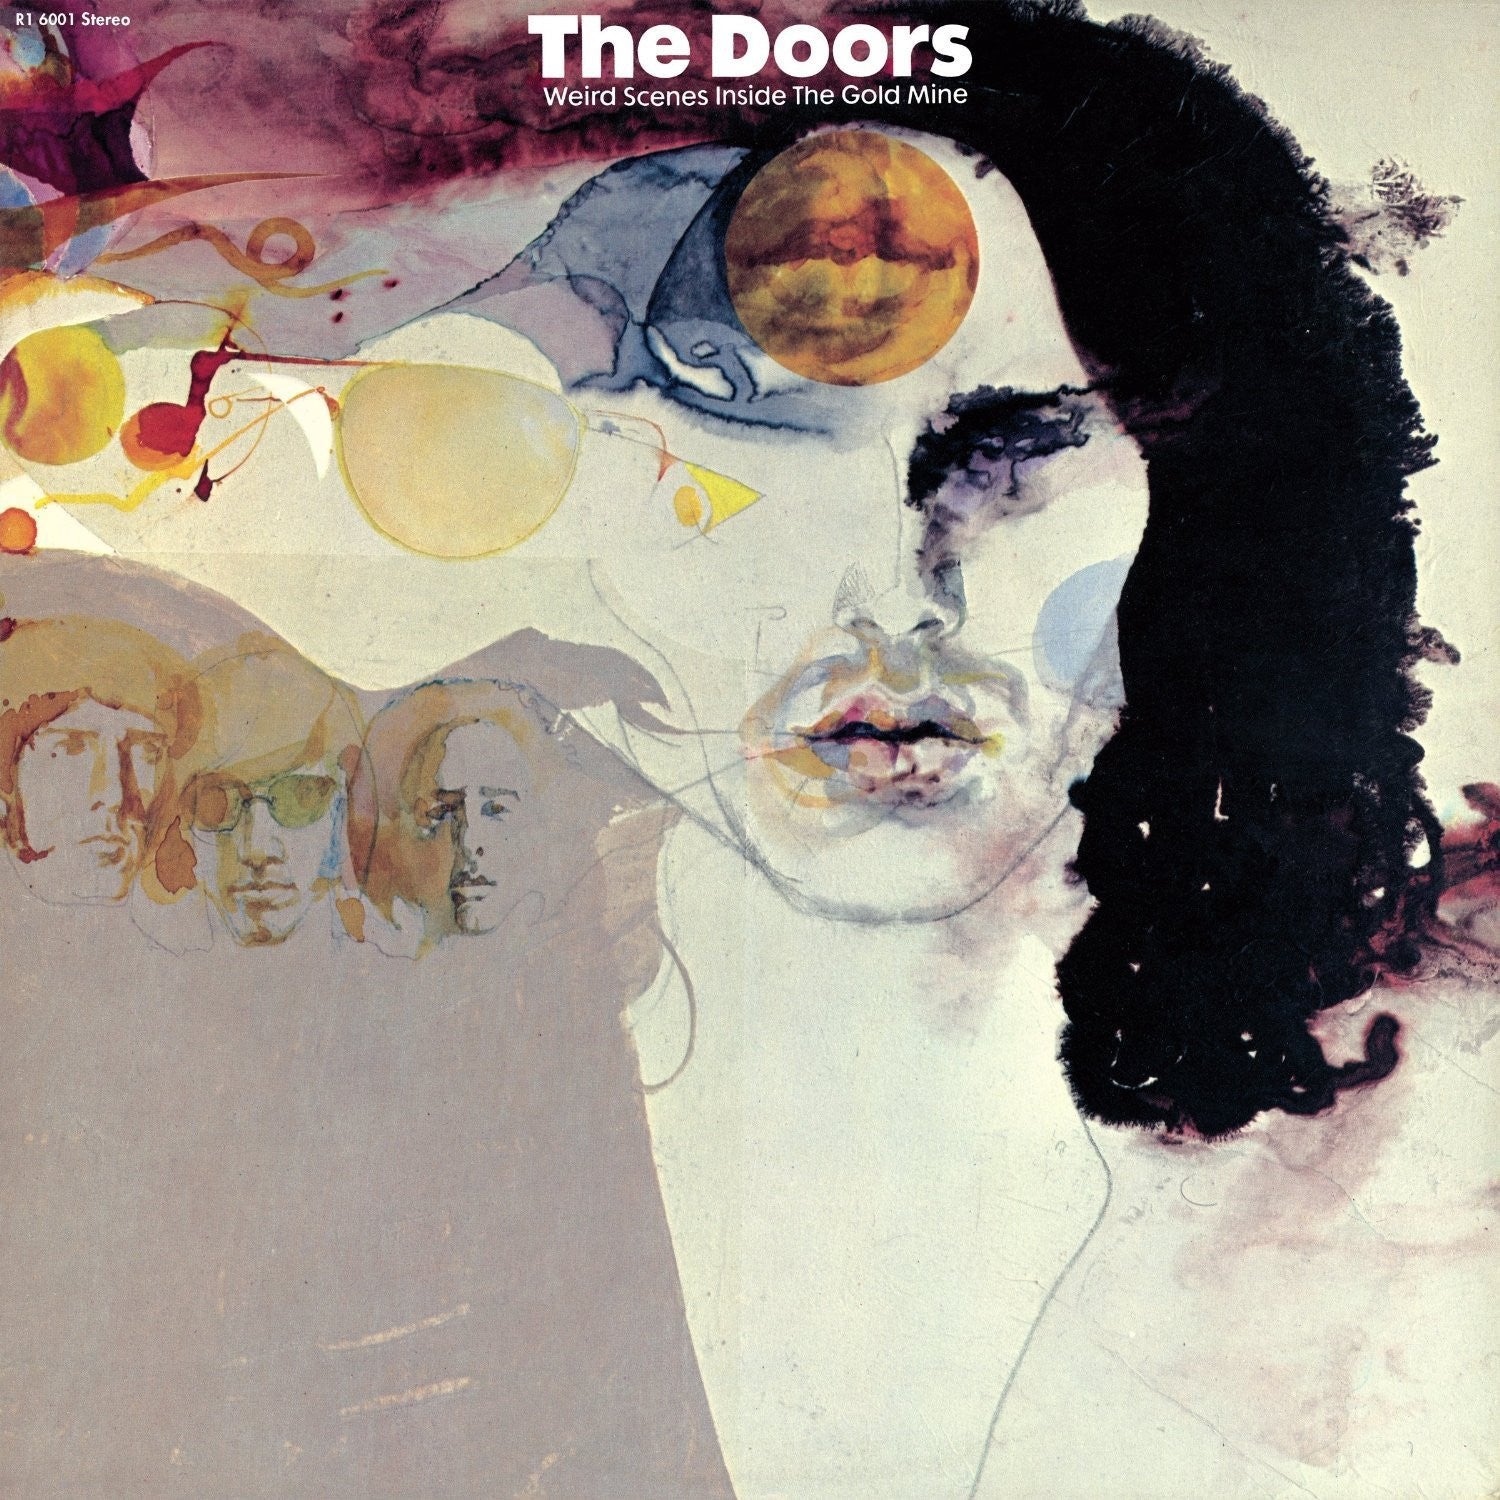 The Doors Weird Scenes Inside The Gold Mine [CD] 1971 front